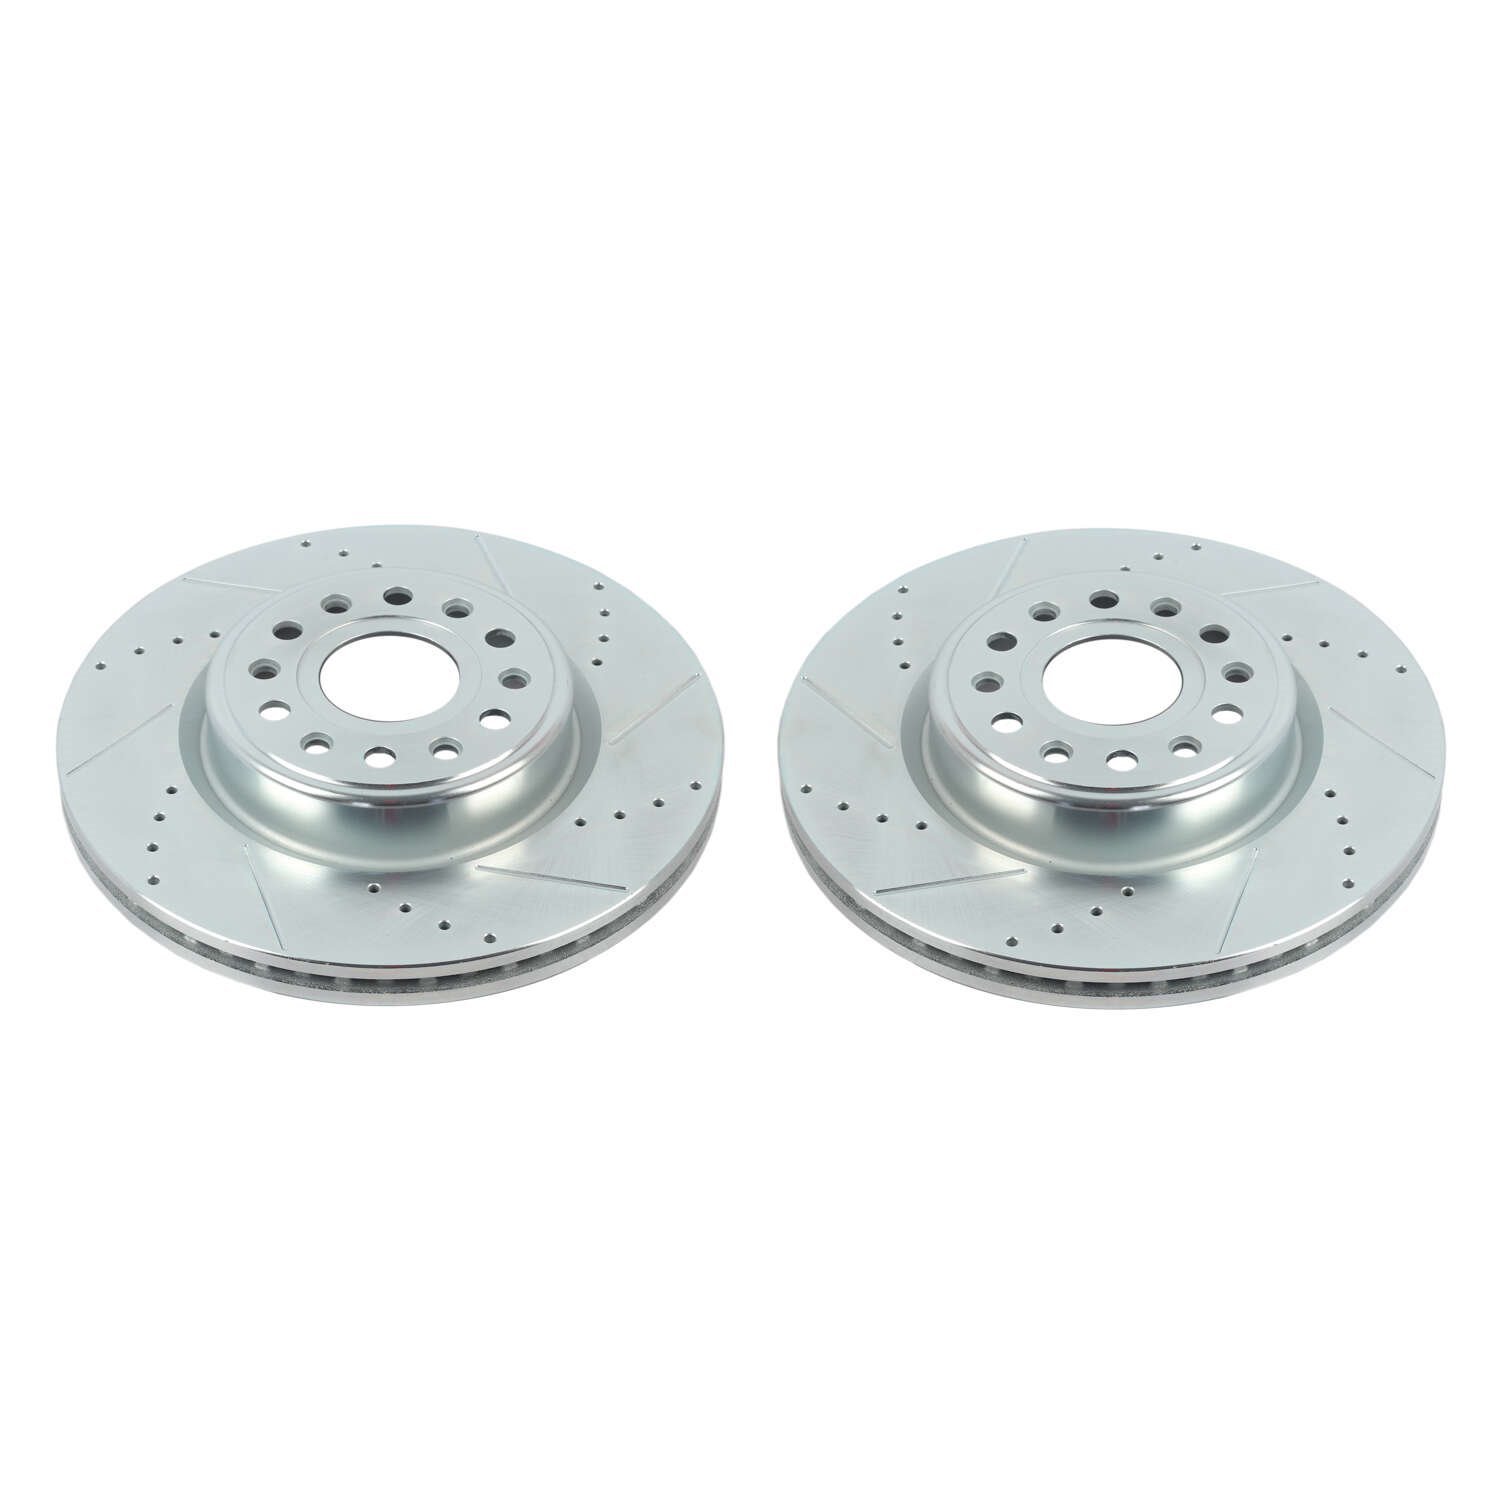 AR86004XPR Evolution Drilled and Slotted Front Brake Rotors, Fits Select Ram 1500